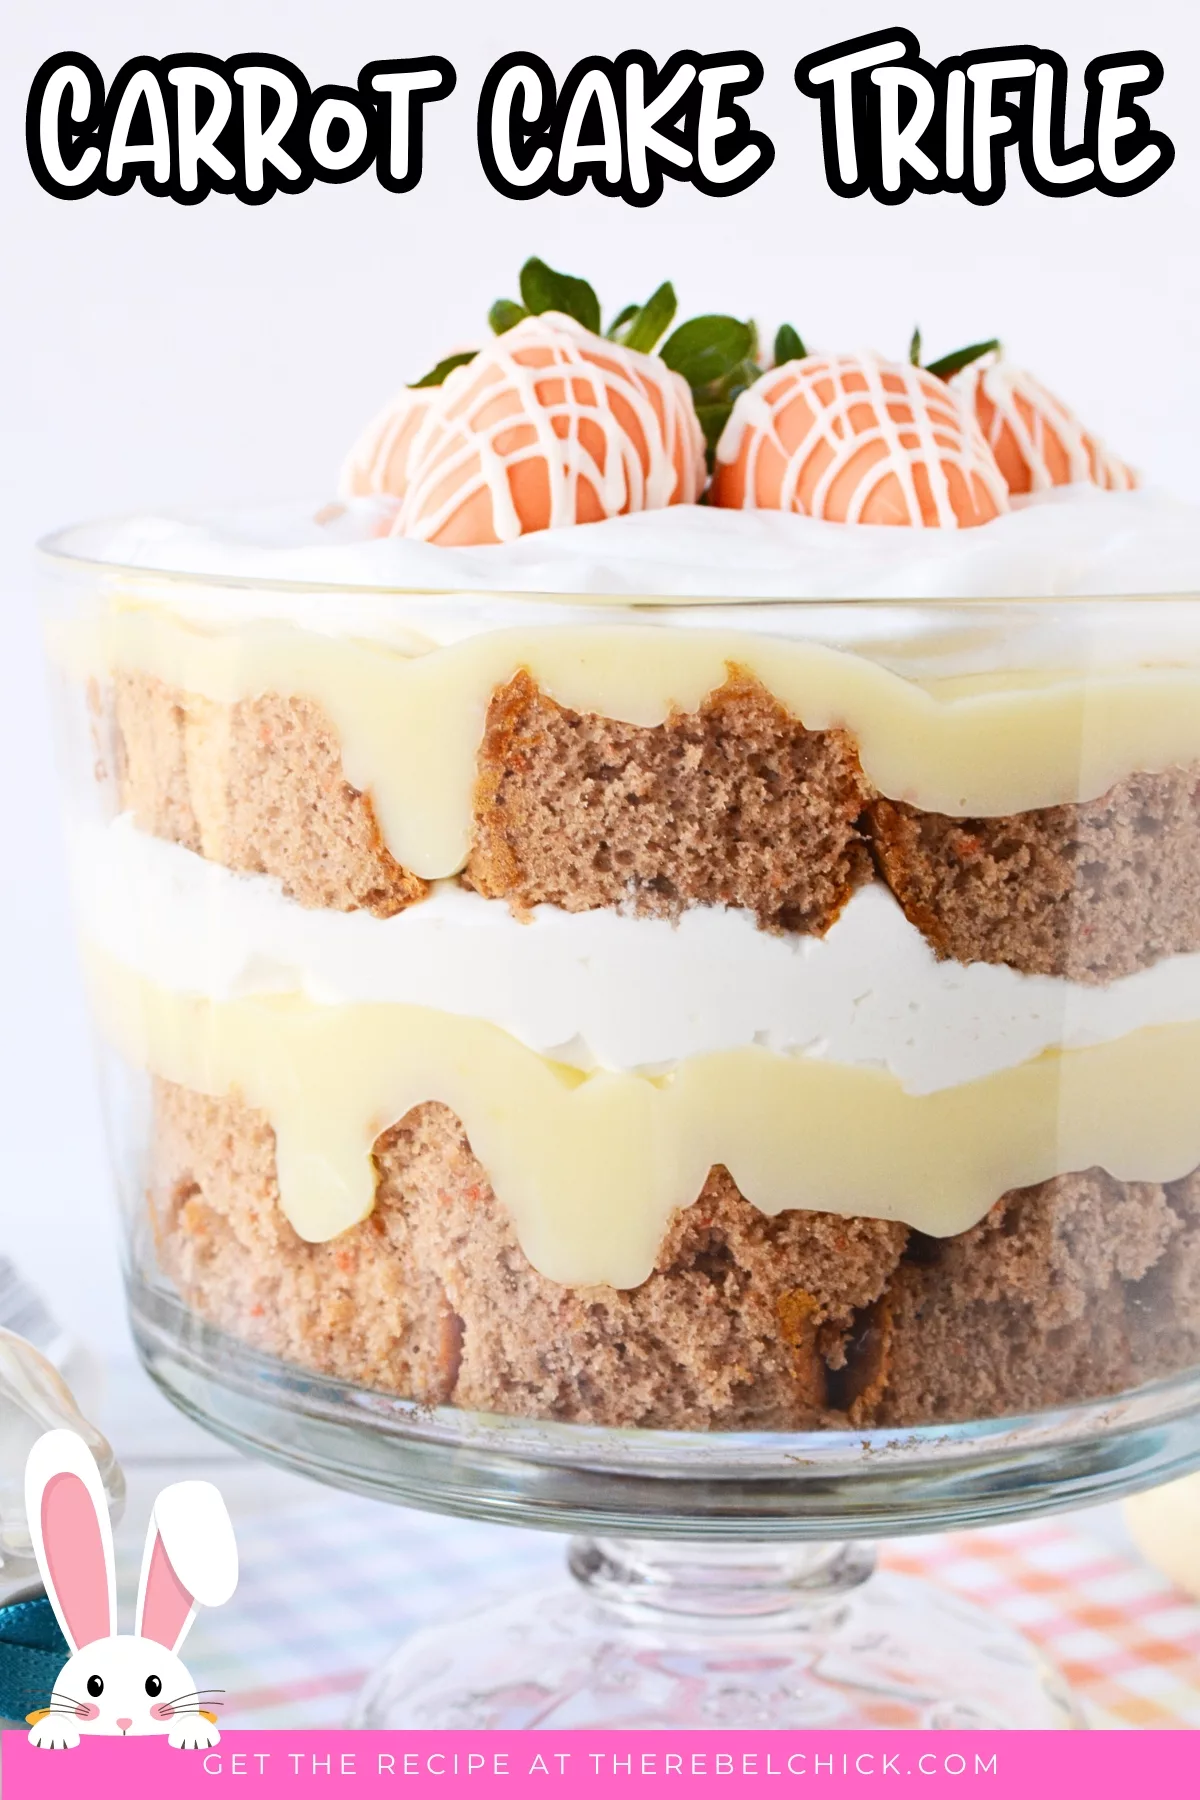 Carrot Cake Trifle Recipe for Easter